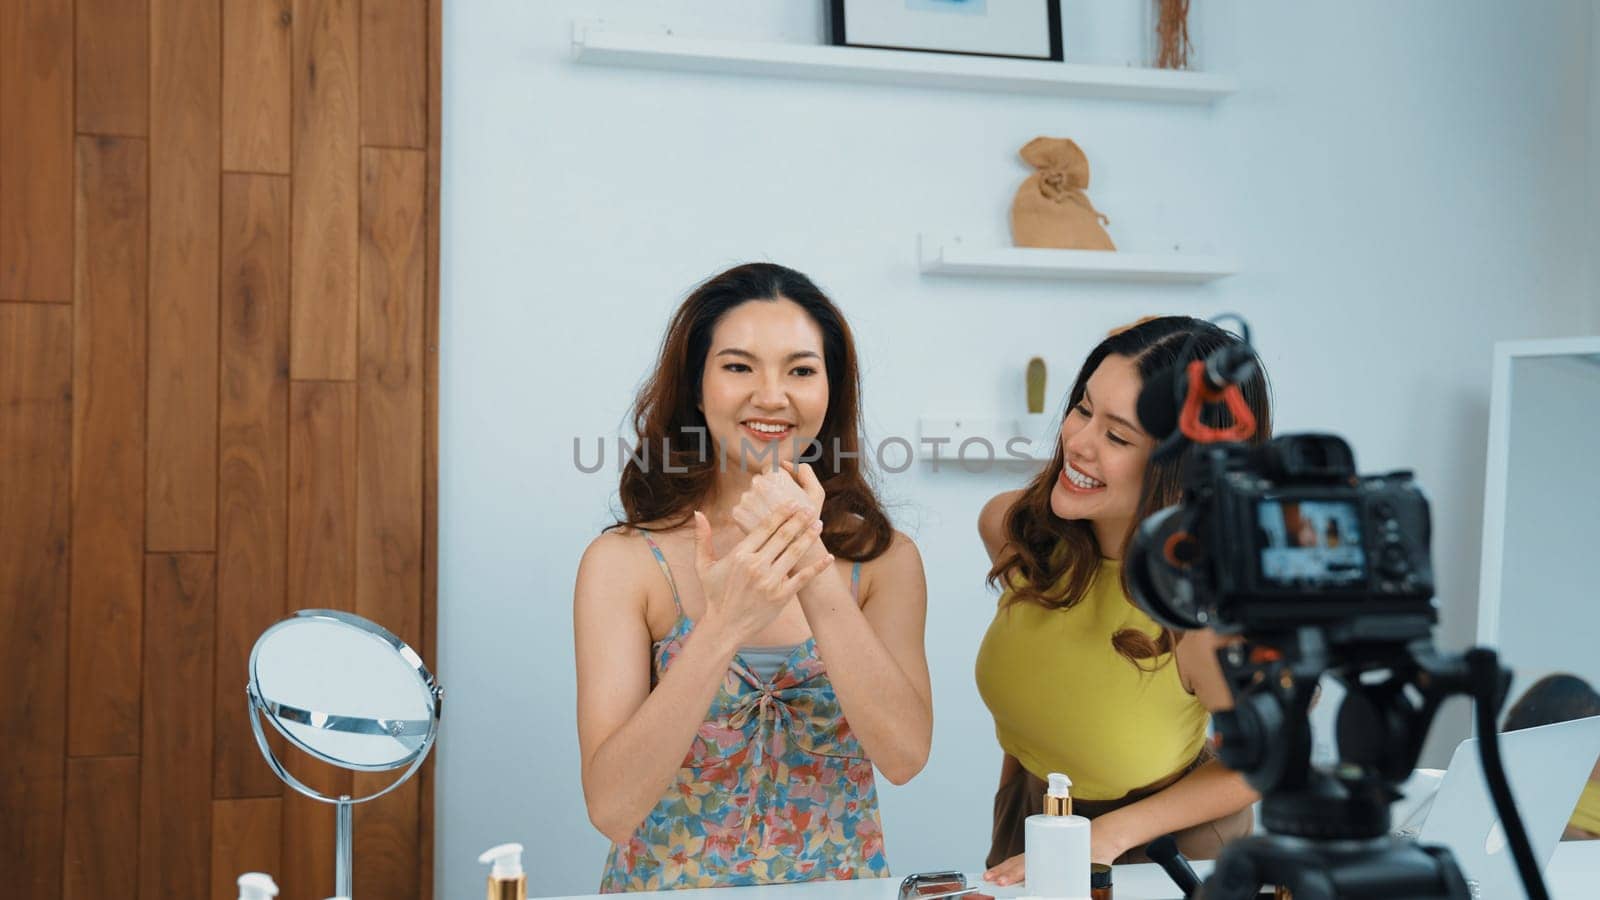 Two women influencer partner shoot live streaming vlog video review skincare for social media or blog. Young girl with vivancy cosmetic studio light for marketing recording session broadcasting online